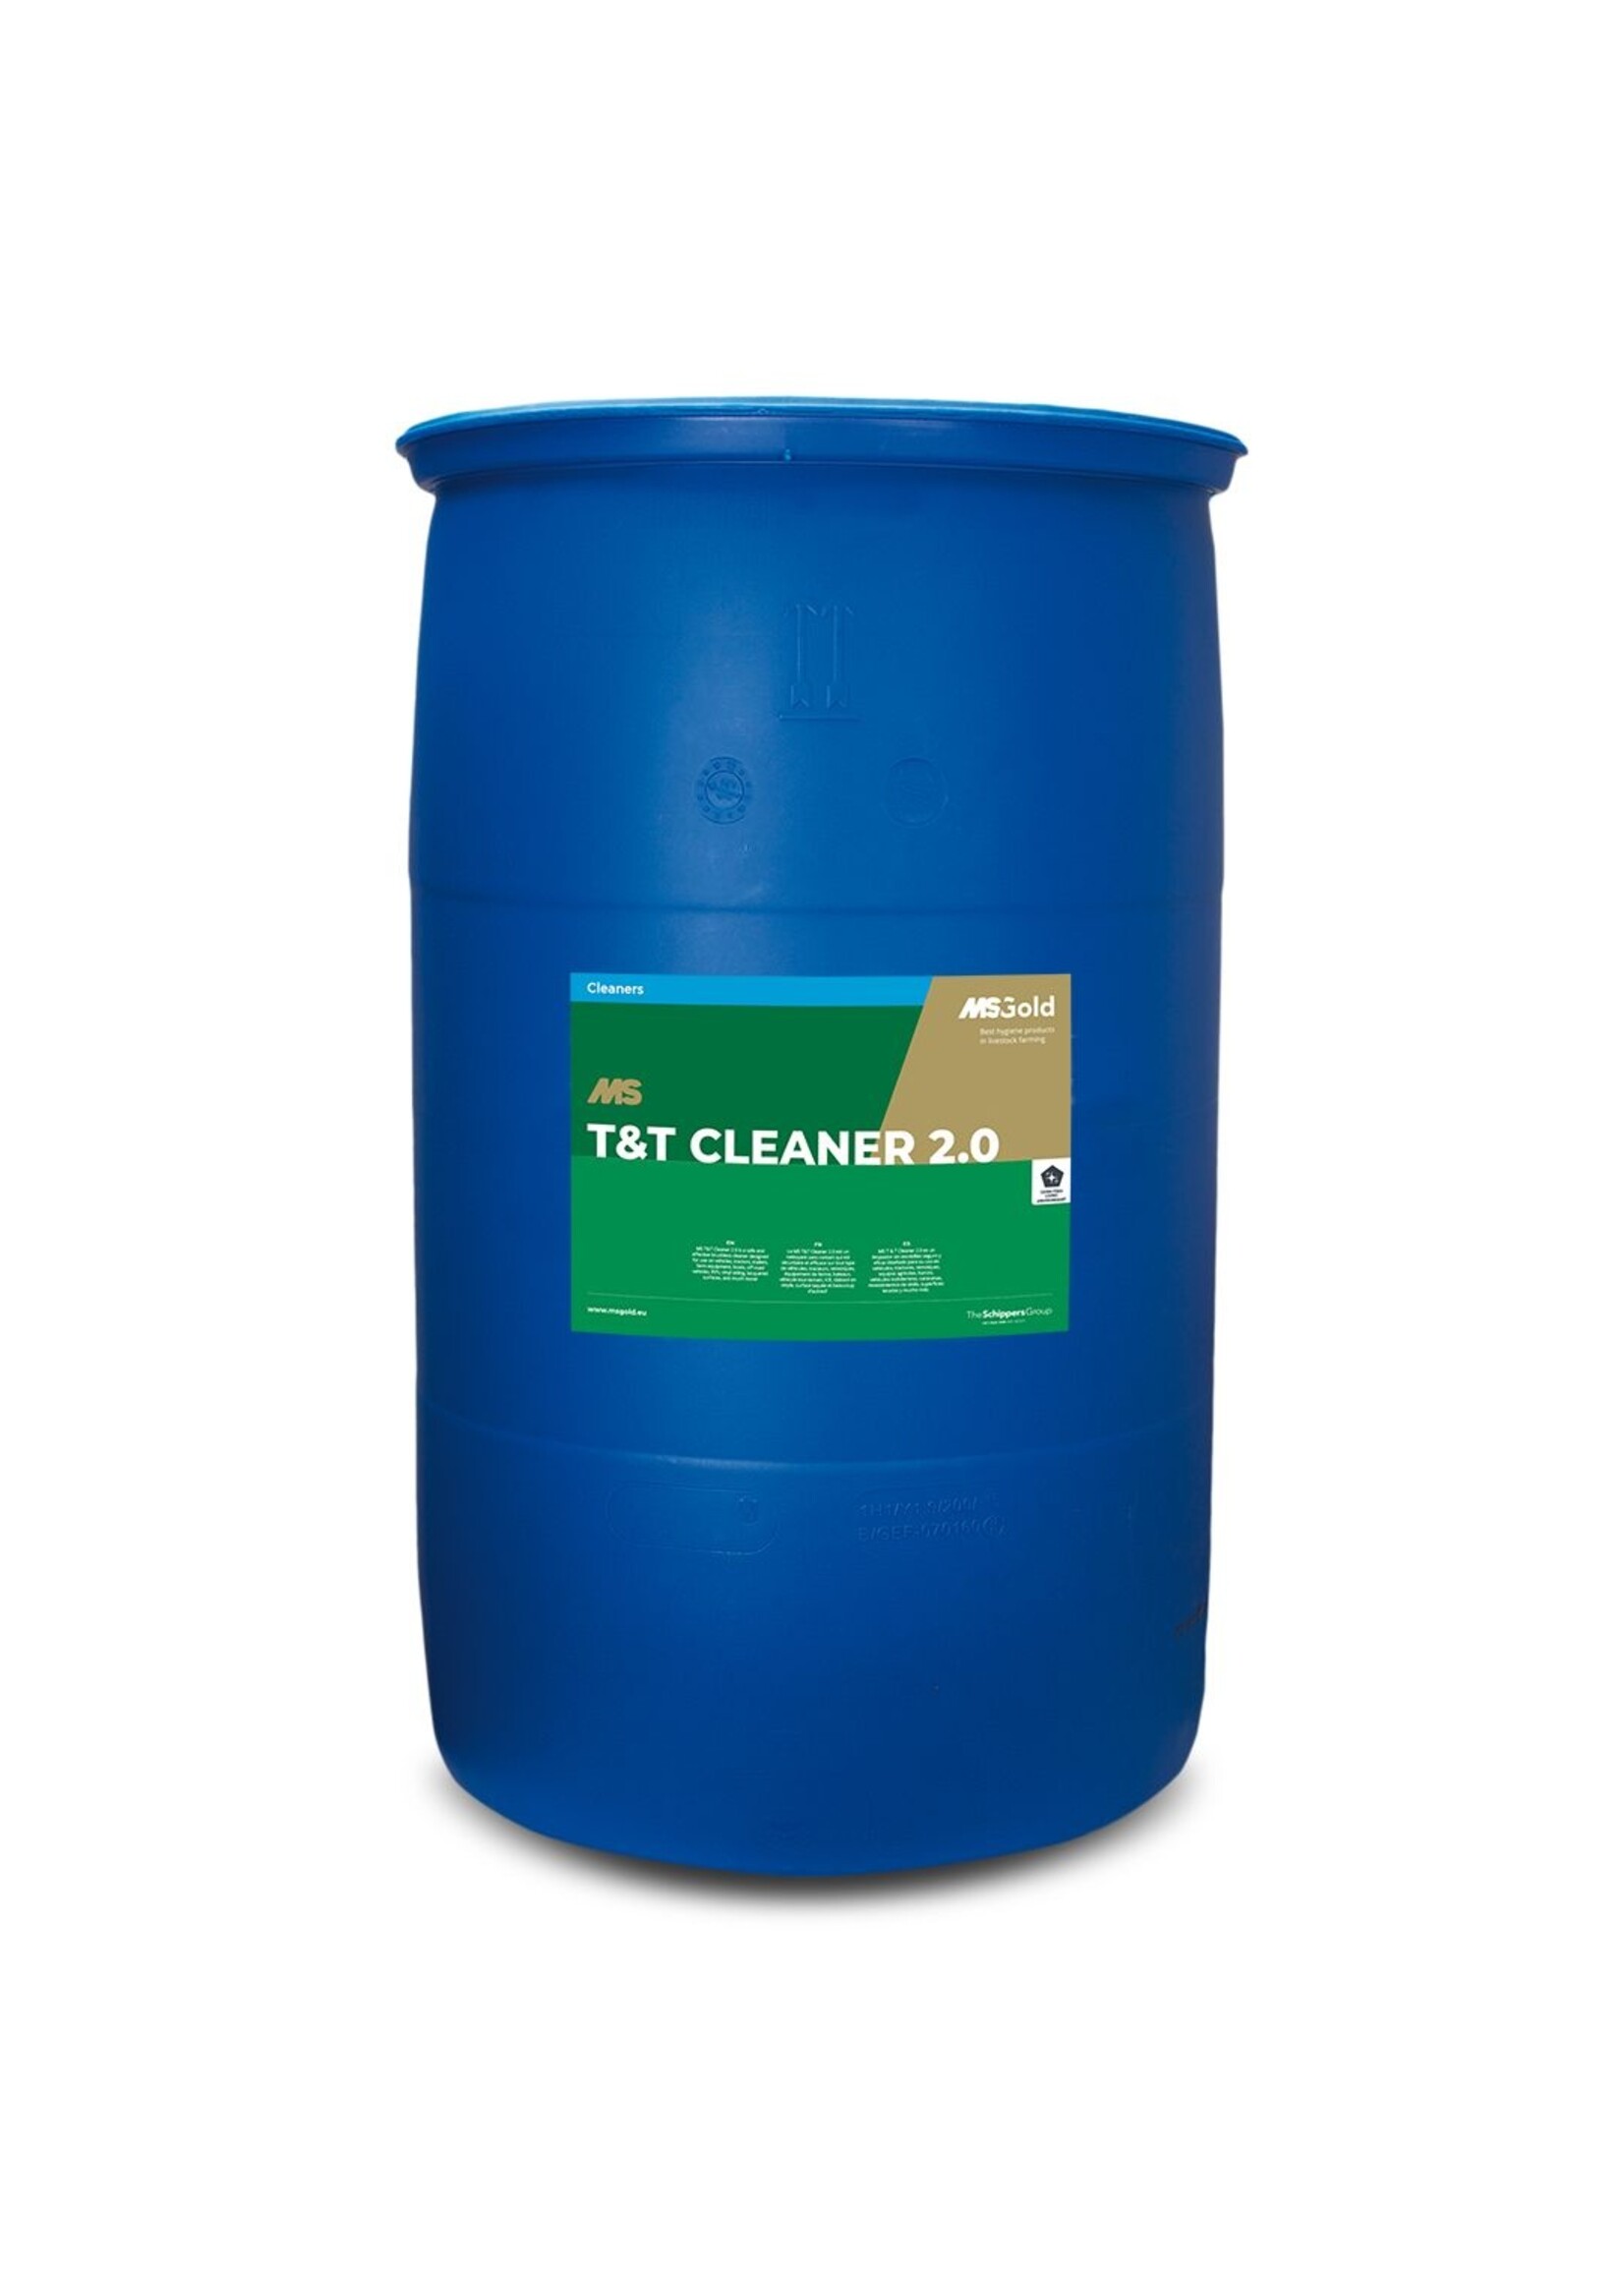 MS Schippers MS Schippers - T&T Cleaner 2.0 -